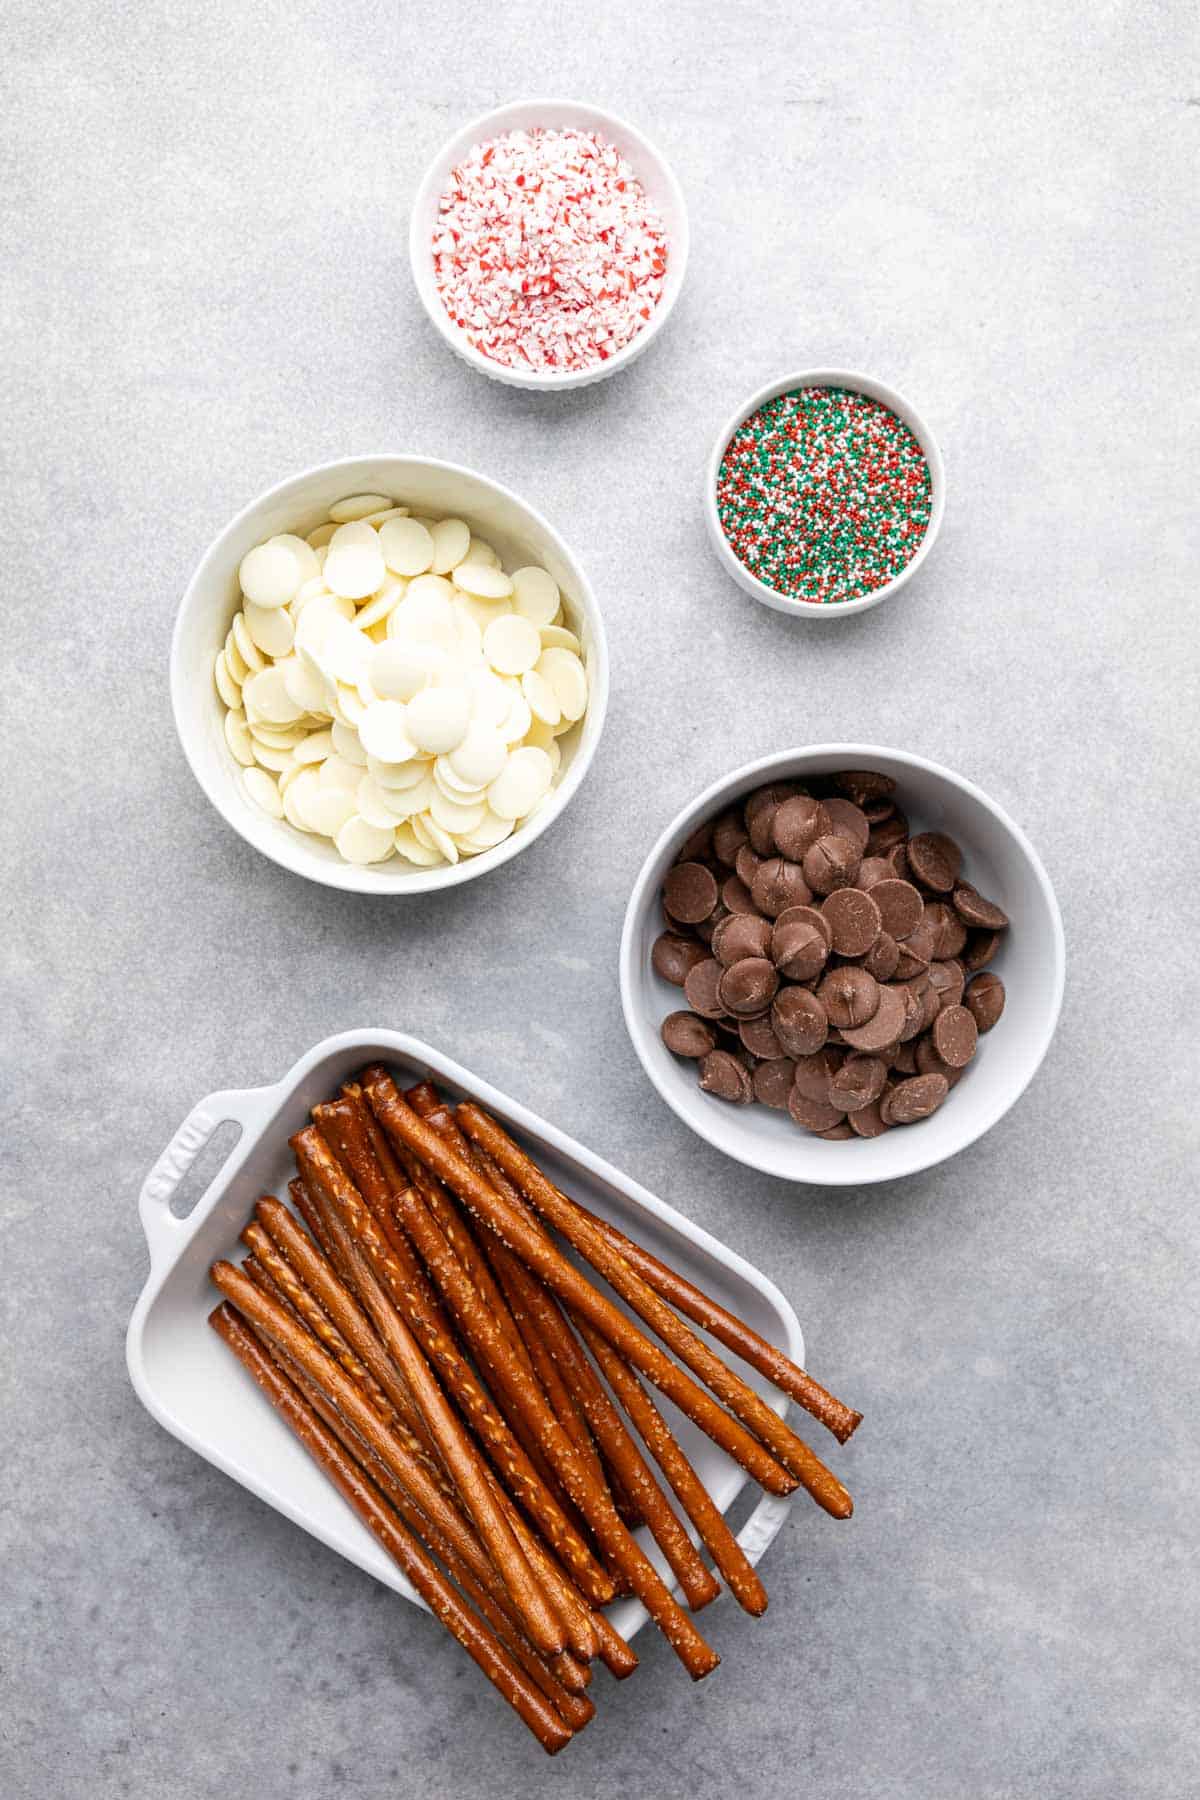 Ingredients needed for chocolate dipped pretzel rods.